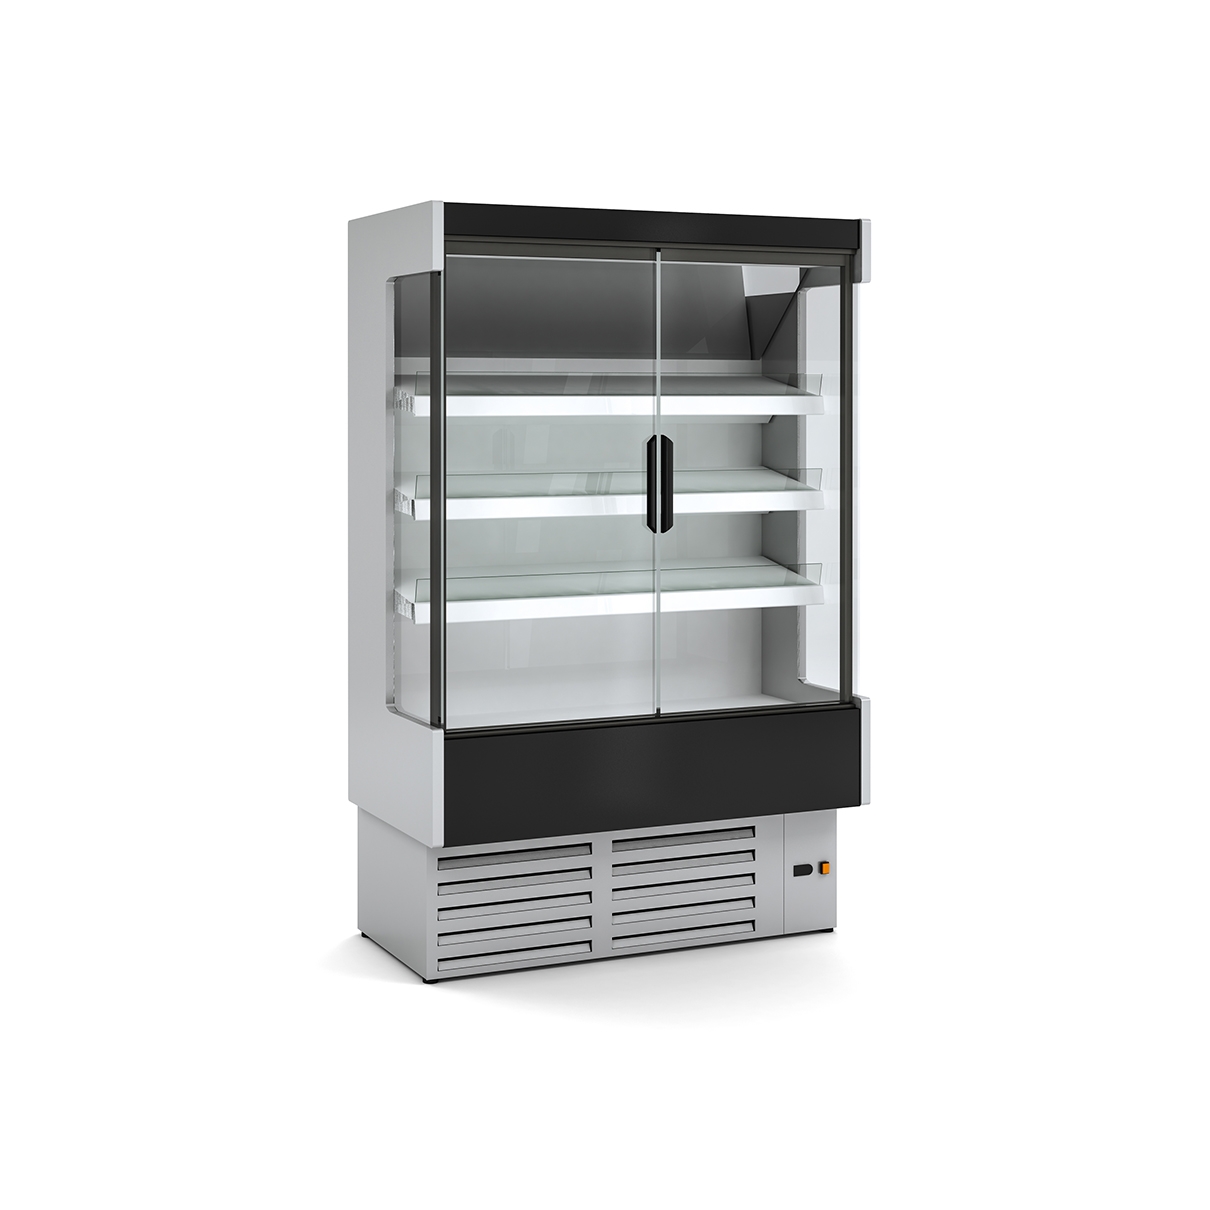 copy of REFRIGERATED WALL CABINET DG1 H1